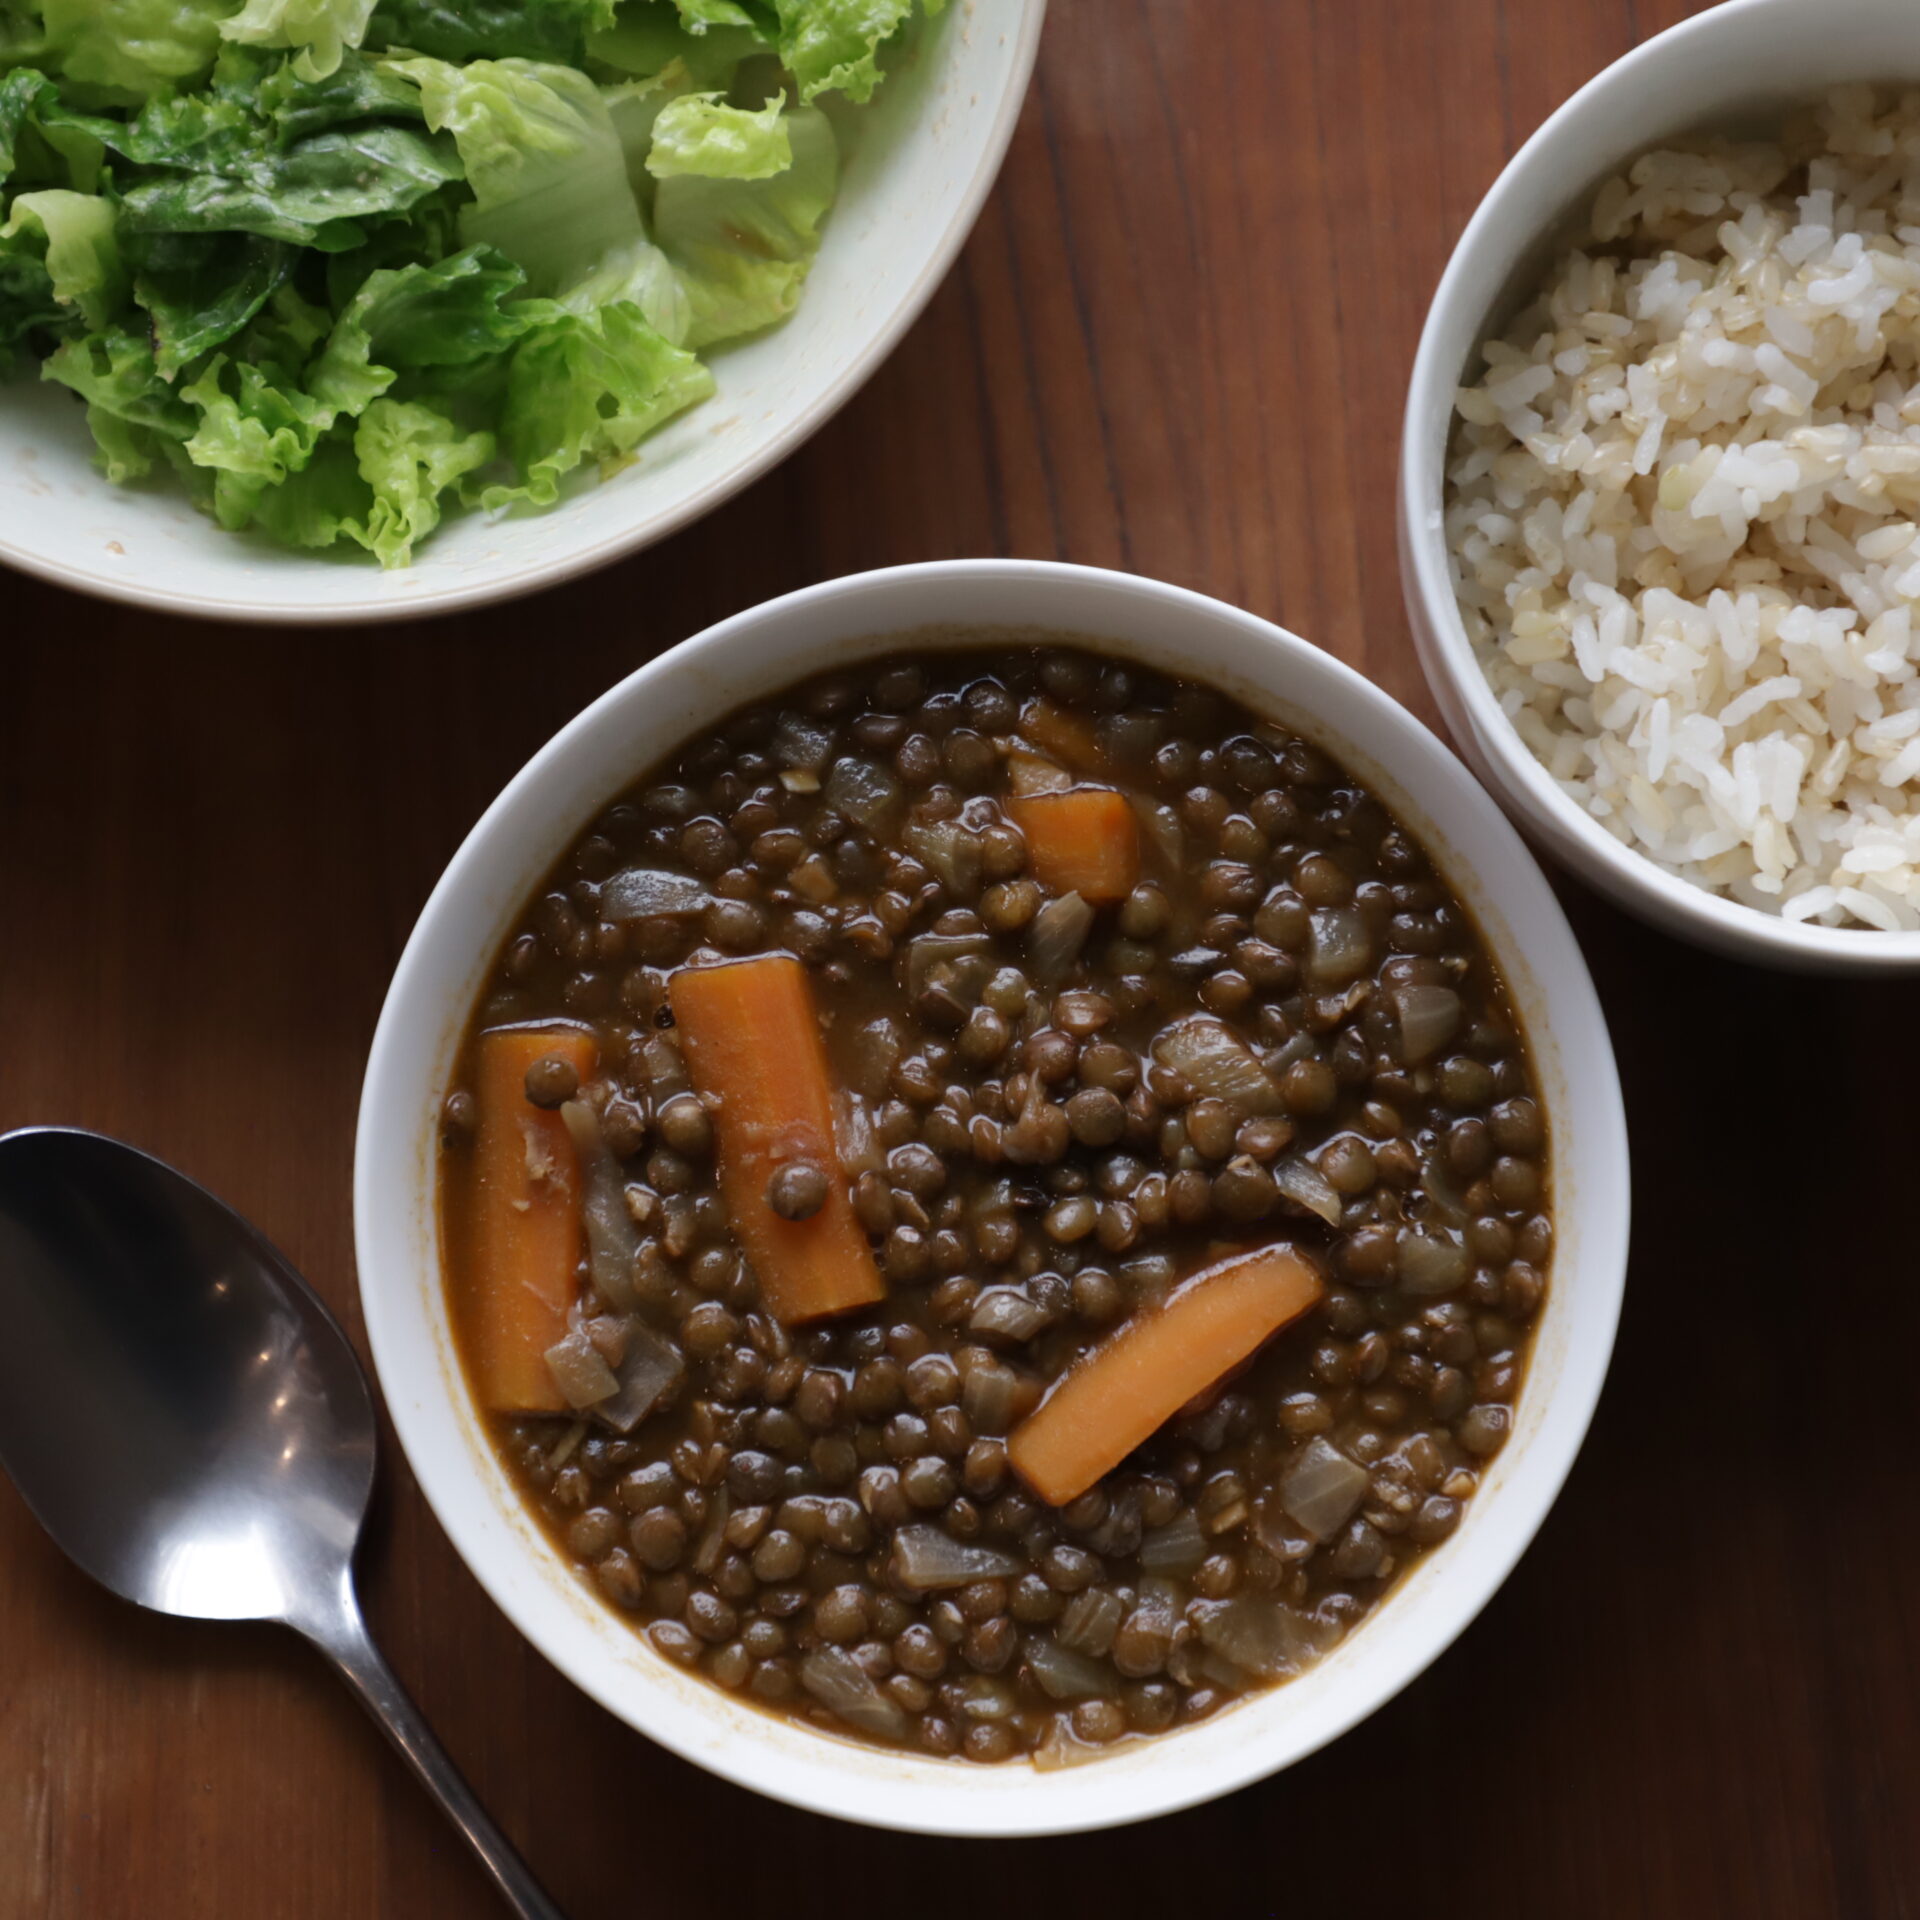 Metal spoon and three bowls on a wood surface: One with brown lentil stew with carrots, one with brown rice, and one with lettuce.